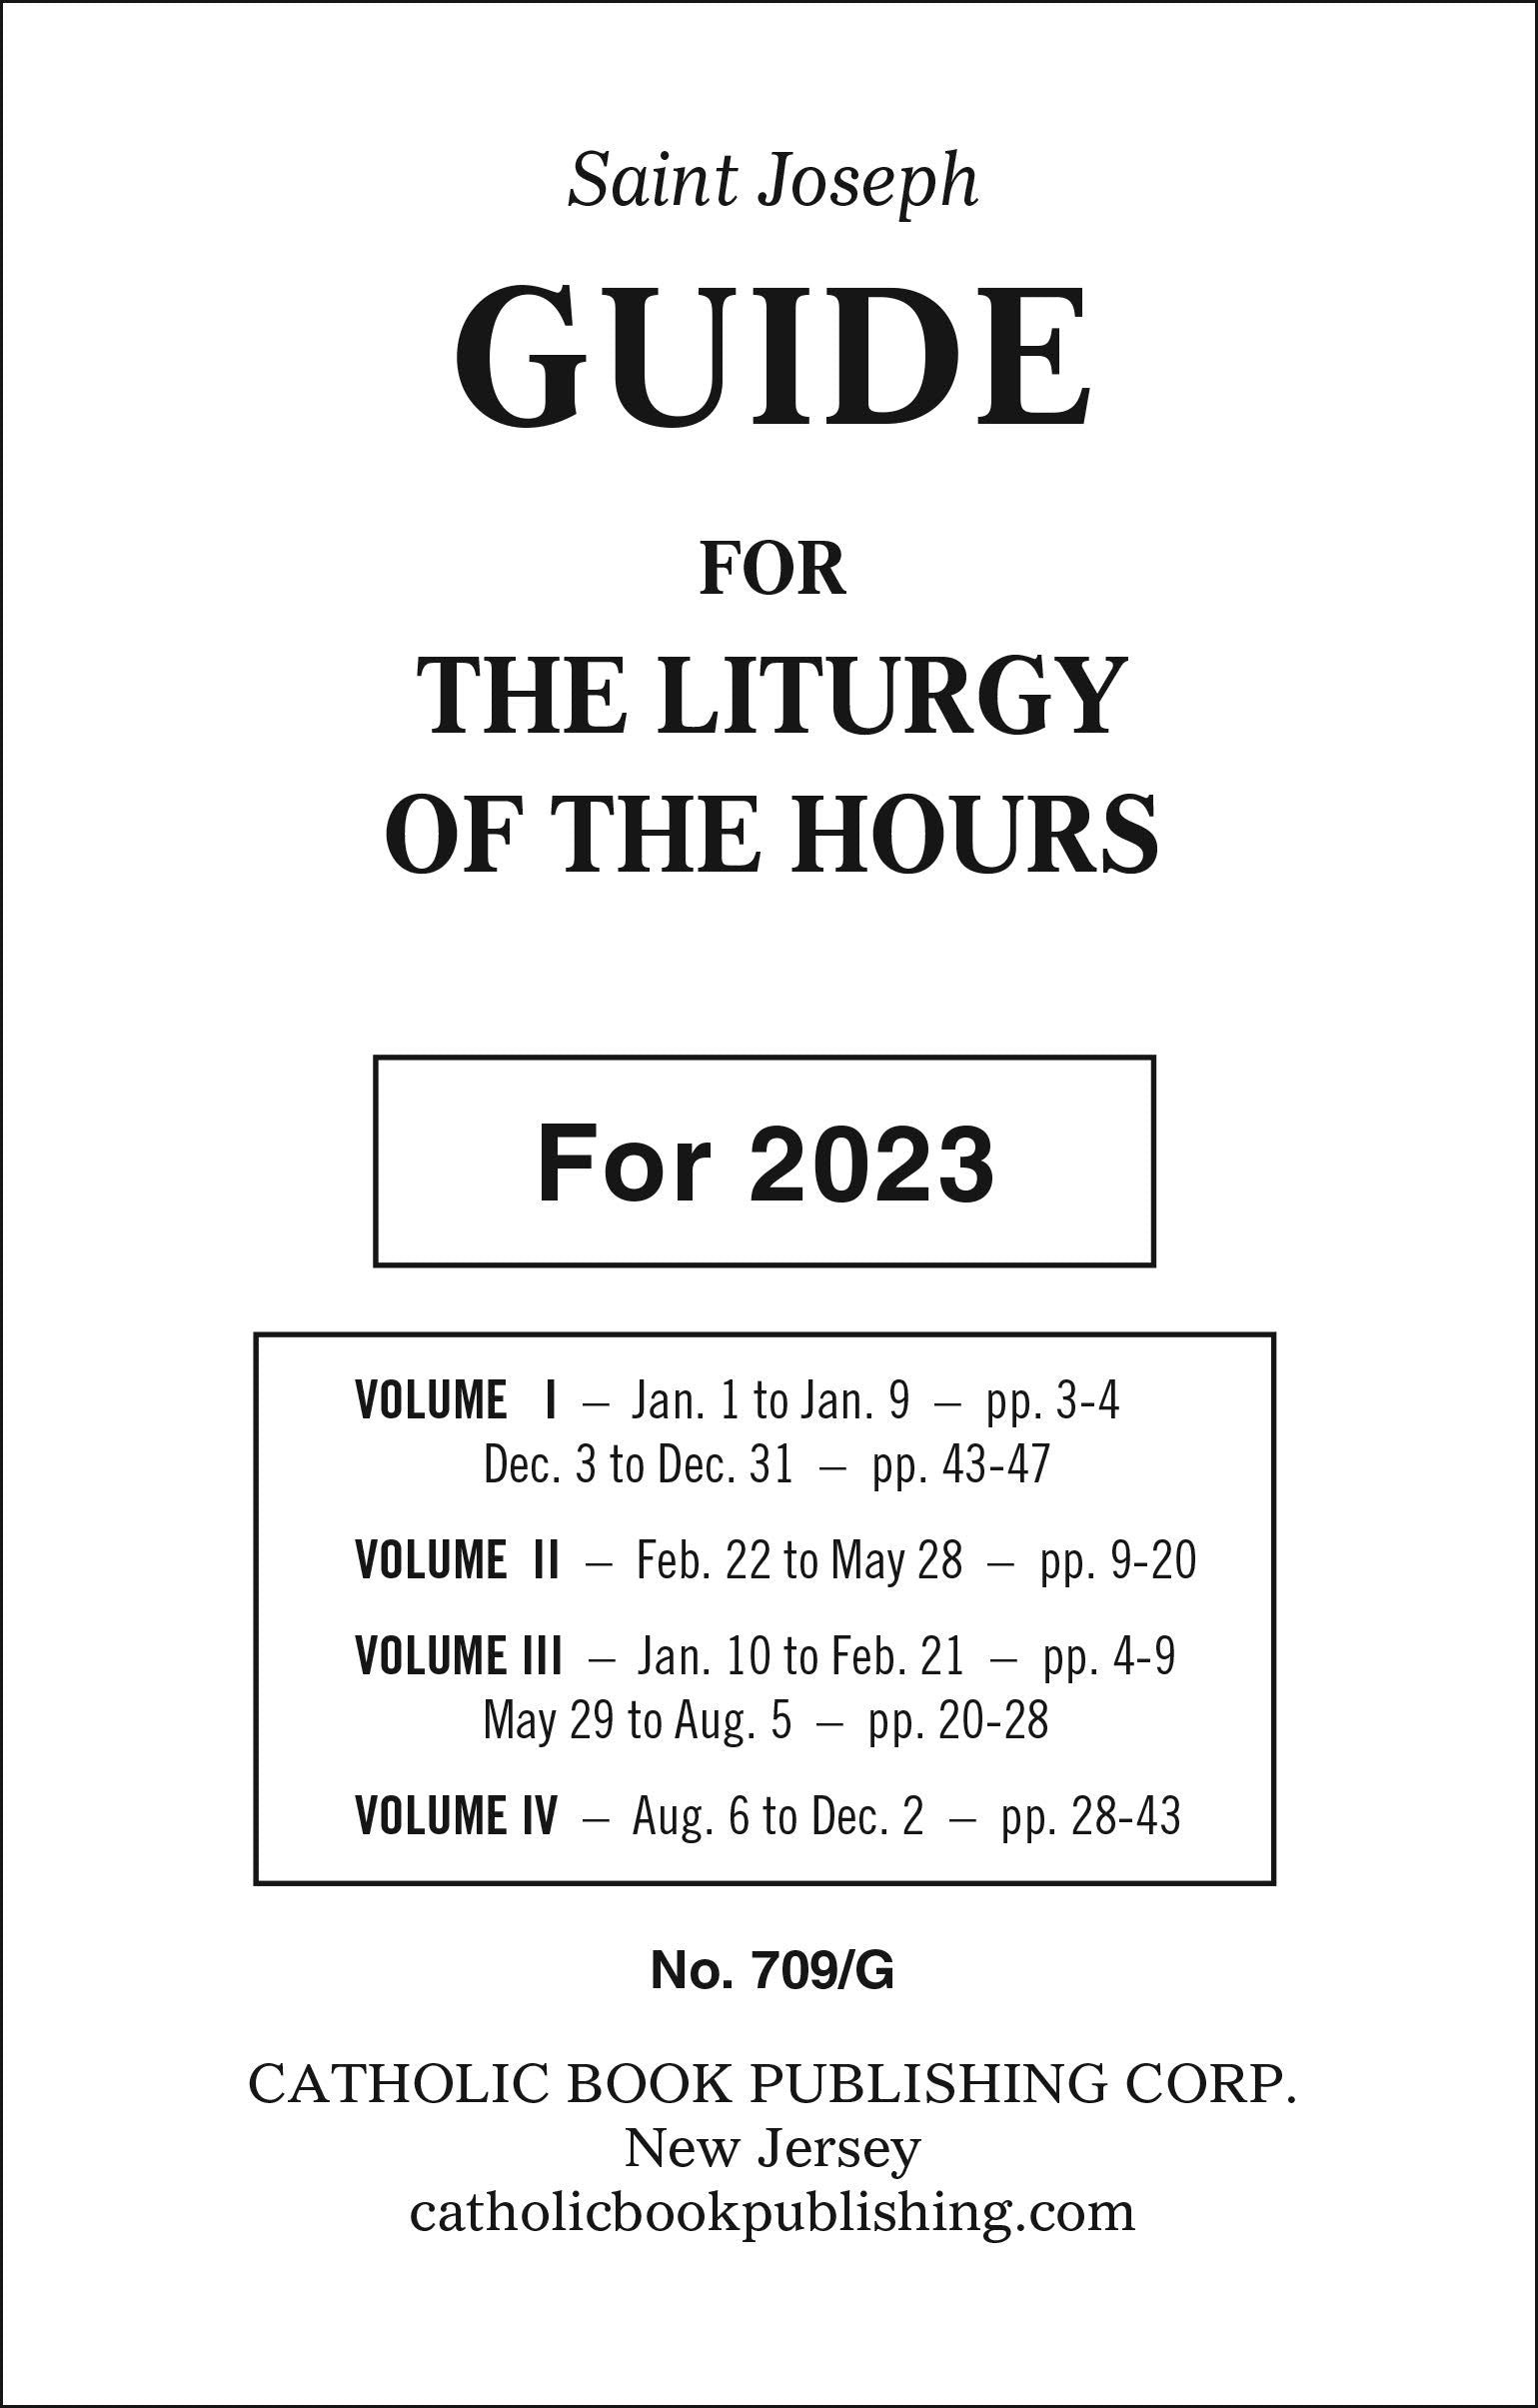 Guide for Liturgy of the Hours 2023 [Large Print]